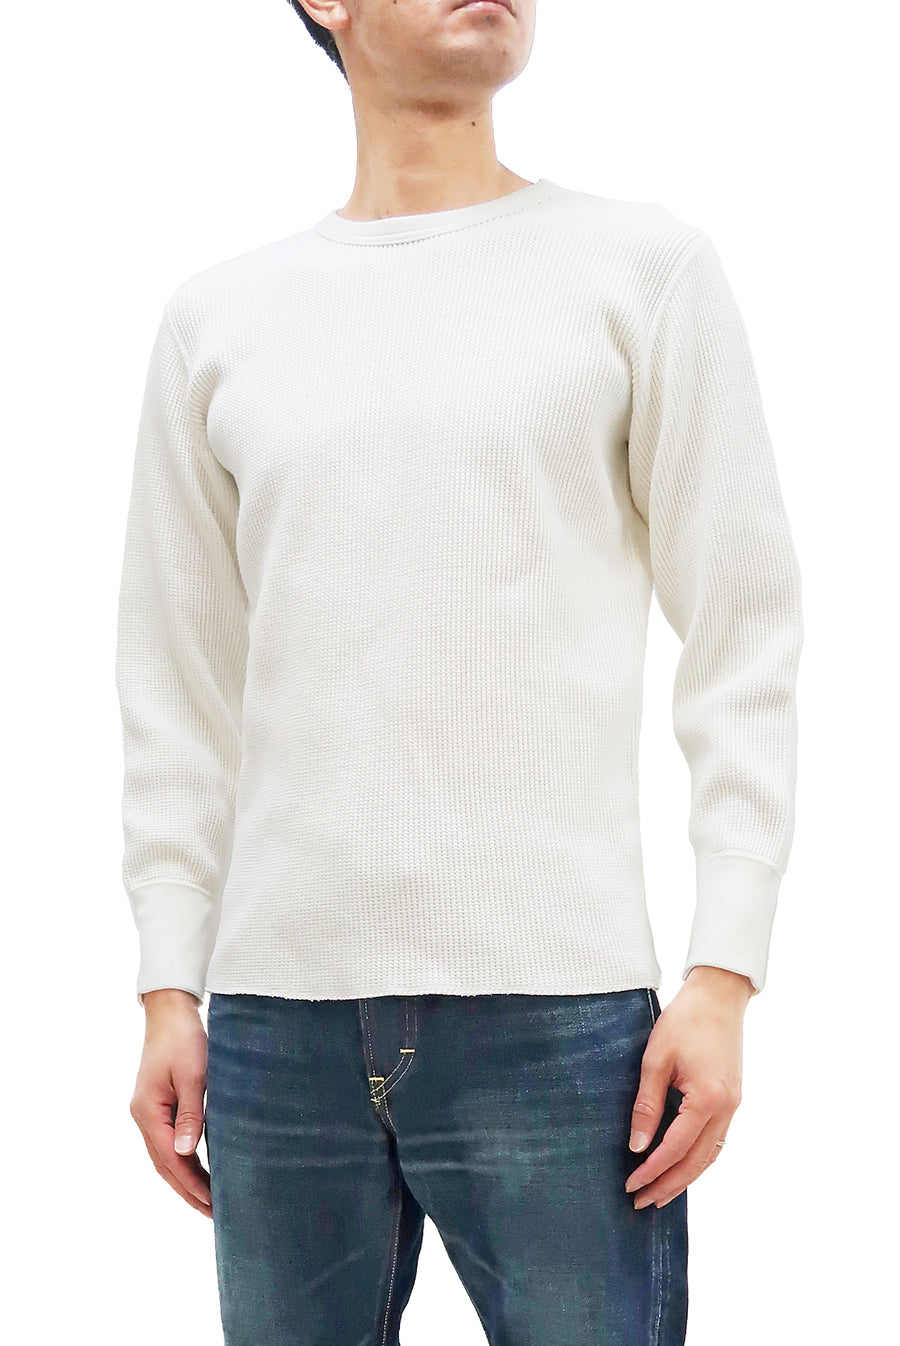 Studio D'artisan Waffle-Knit Thermal T-Shirt Men's Long Sleeve Solid Crew-Neck Super Heavyweight Thermal Tee 9936 White